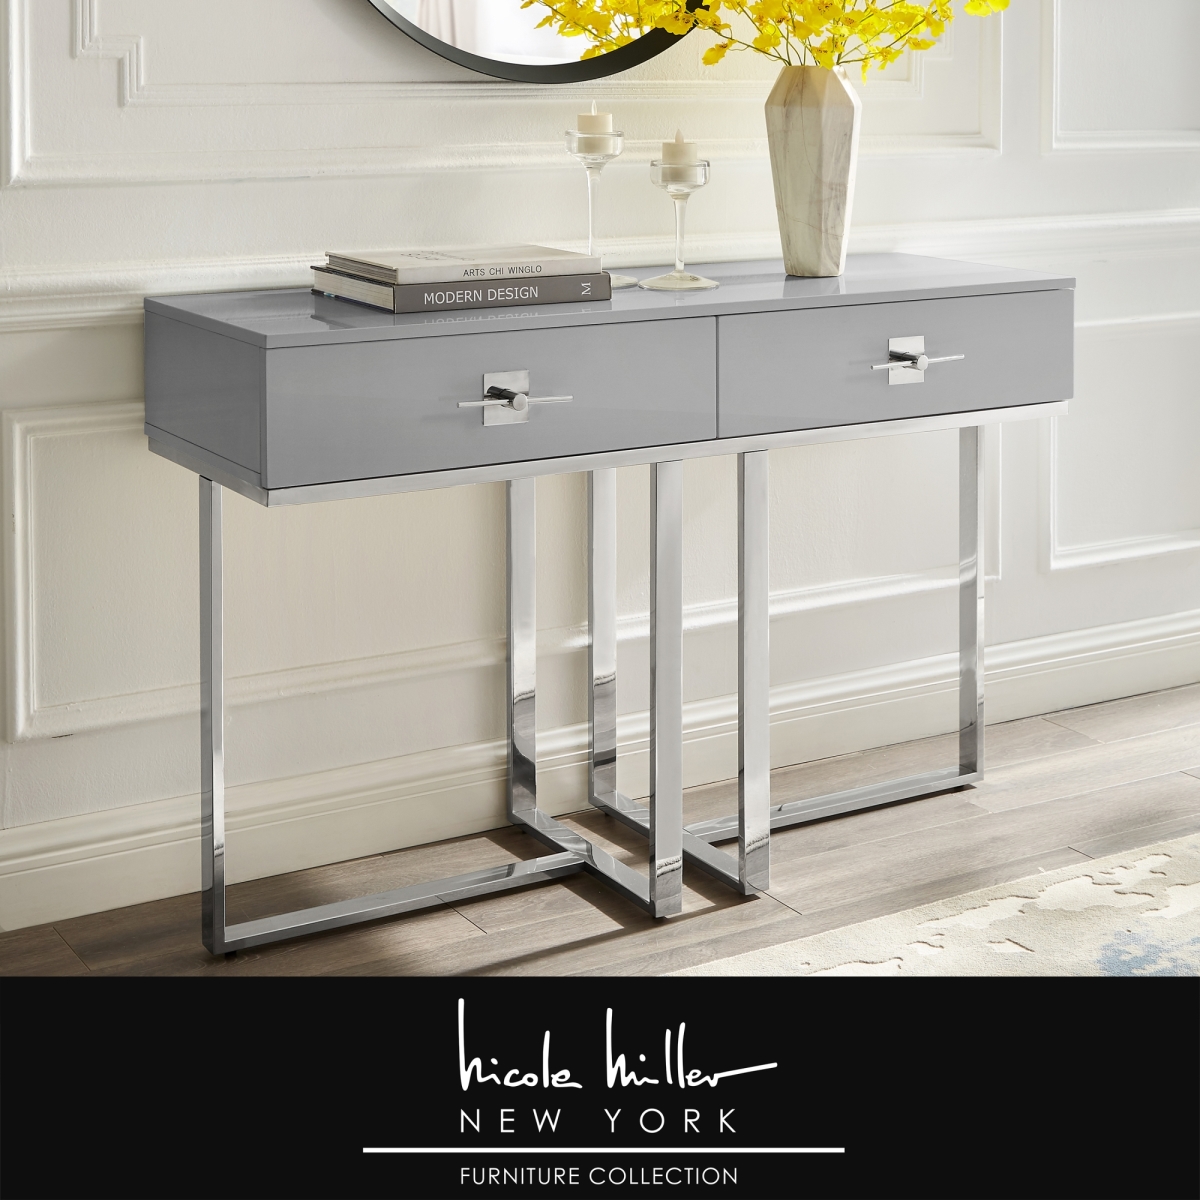 Nce197-09lg-ue 42.7 X 15.4 X 29.7 In. Mano Console Table, Light Grey & Chrome